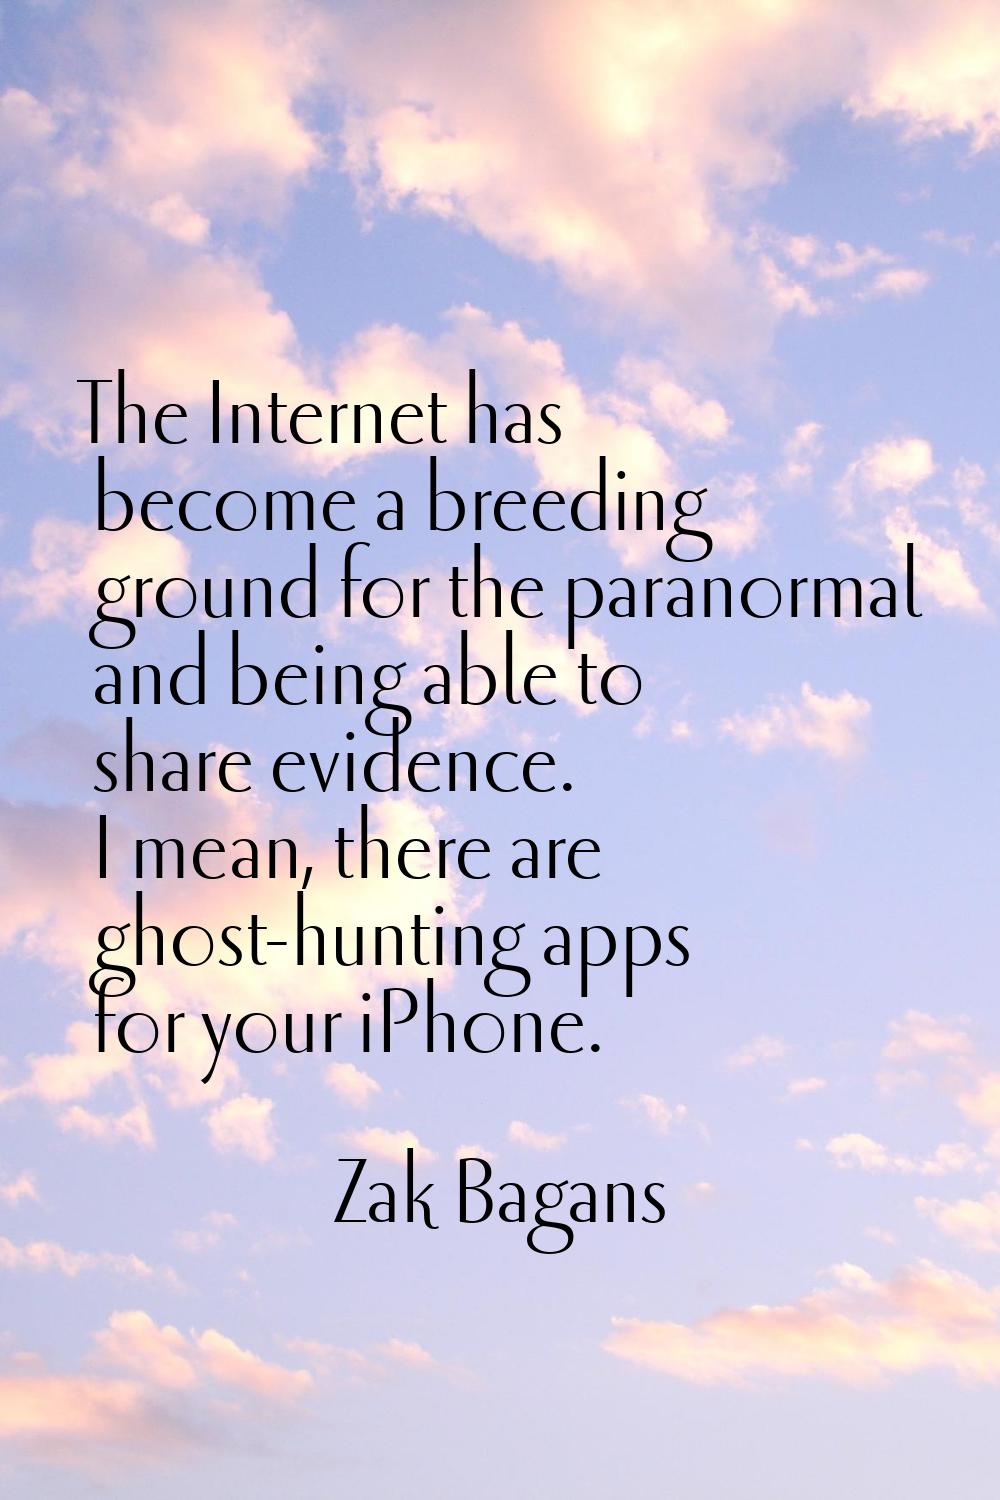 The Internet has become a breeding ground for the paranormal and being able to share evidence. I me